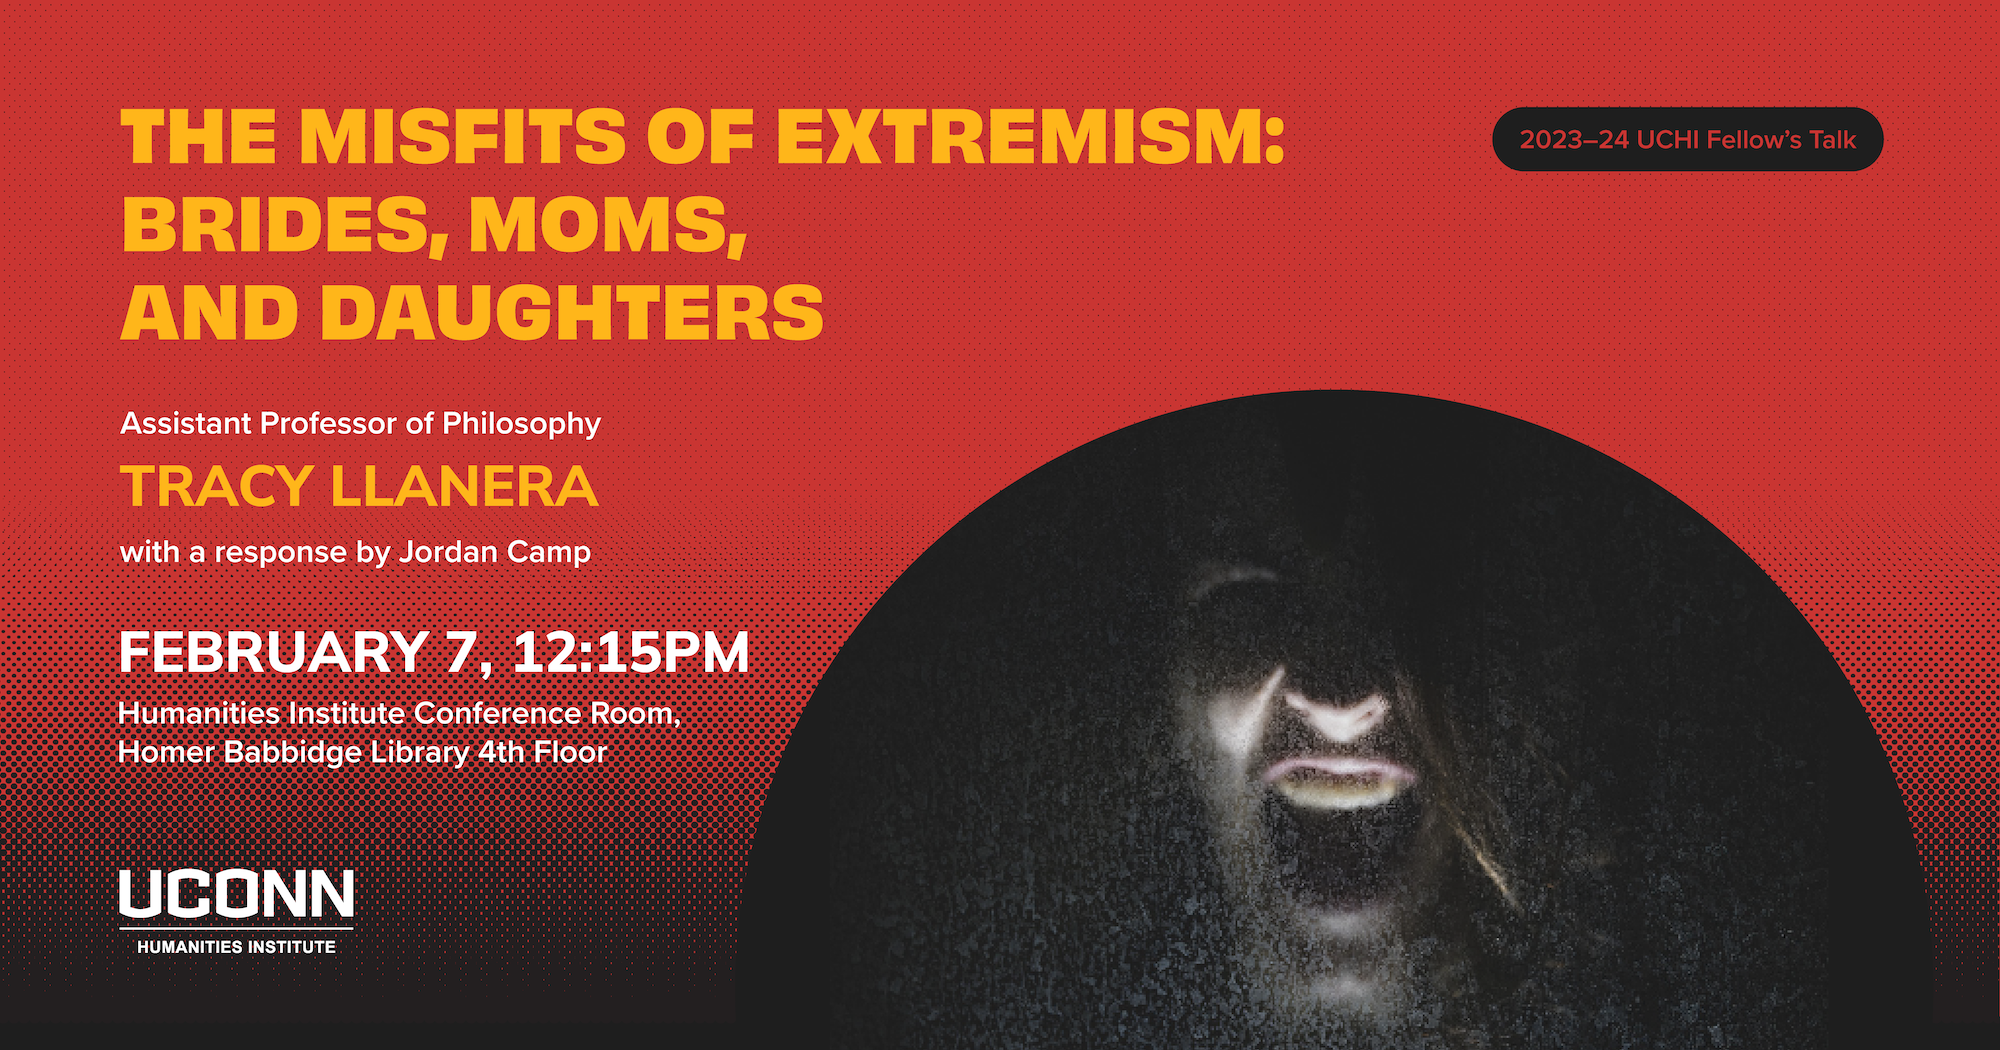 2023–24 Fellow's Talk. The Misfits of Extremism: Brides, Moms, and Daughters. Assistant Professor of Philosophy Tracy Llanera, with a response by Jordan Camp. February 7, 12:15pm. Humanities Institute Conference Room, HBL Library 4th floor.